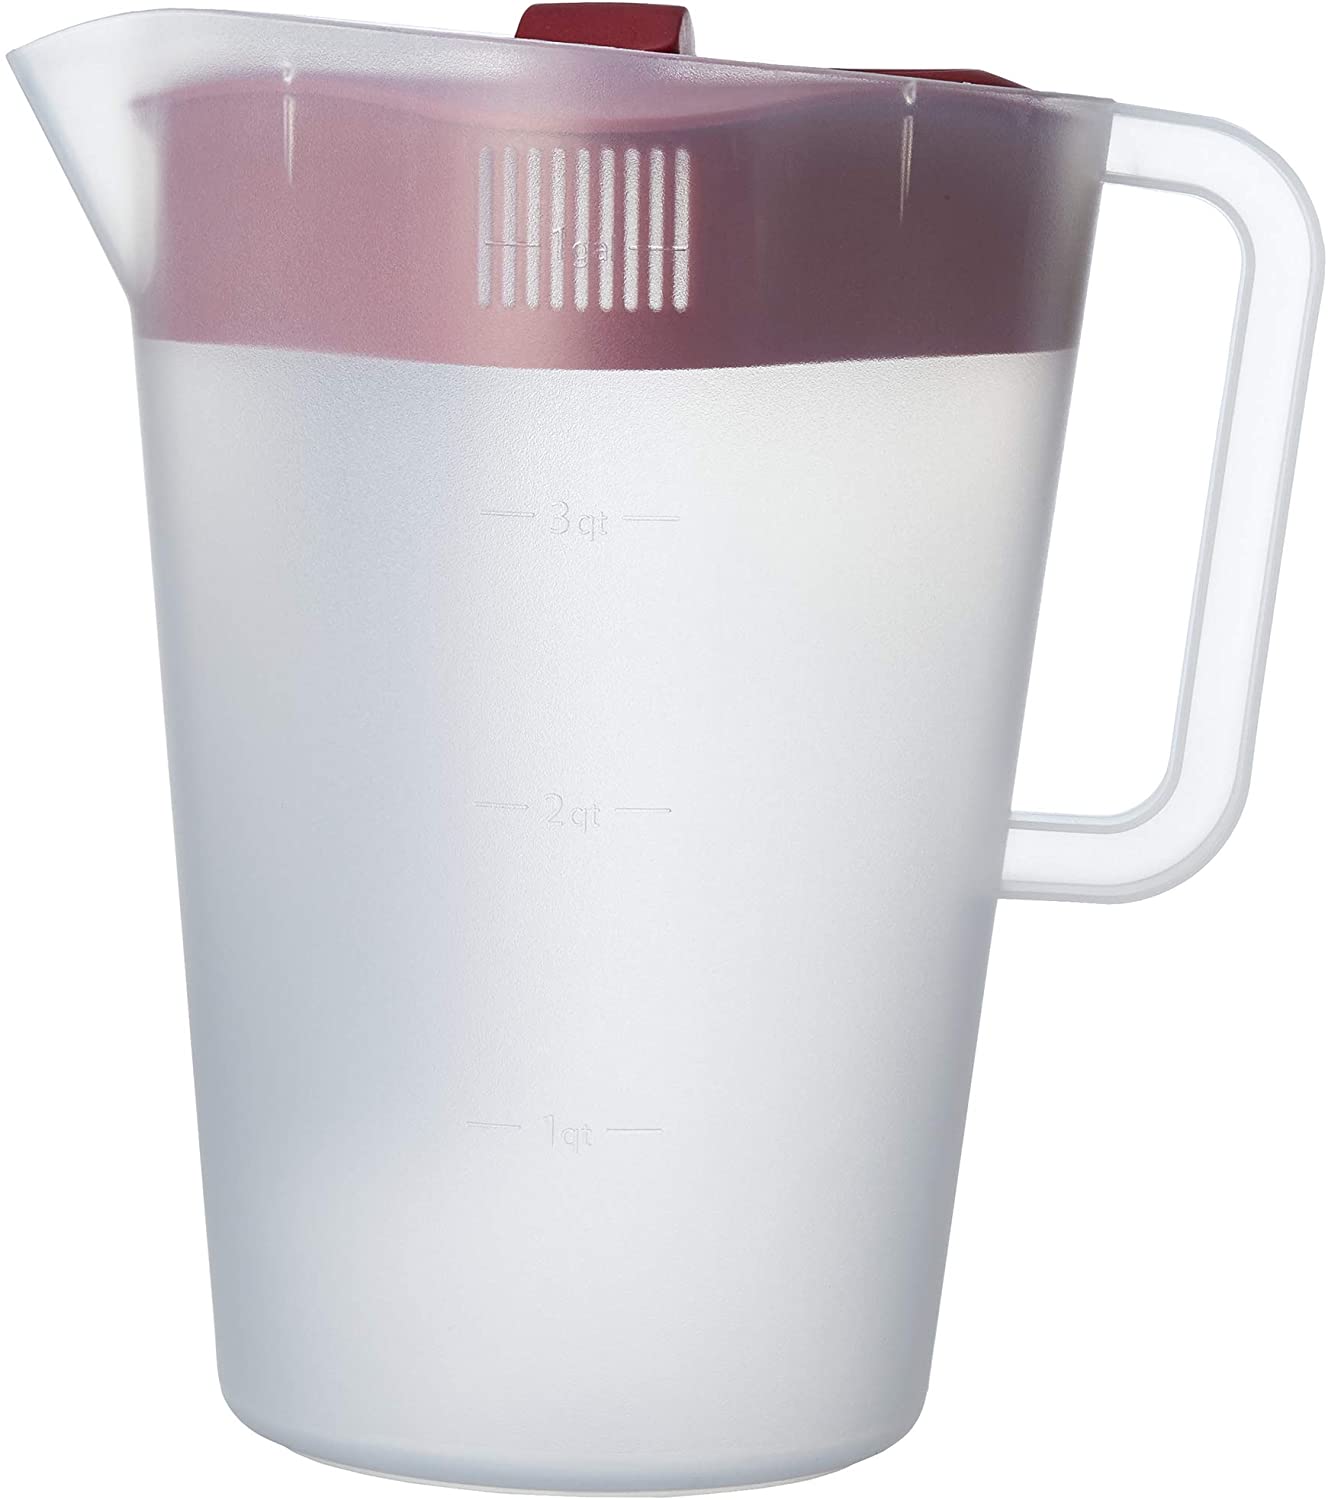 Rubbermaid, 2 Quart, 1 Pack, Red, Plastic Simply Pour Pitcher with